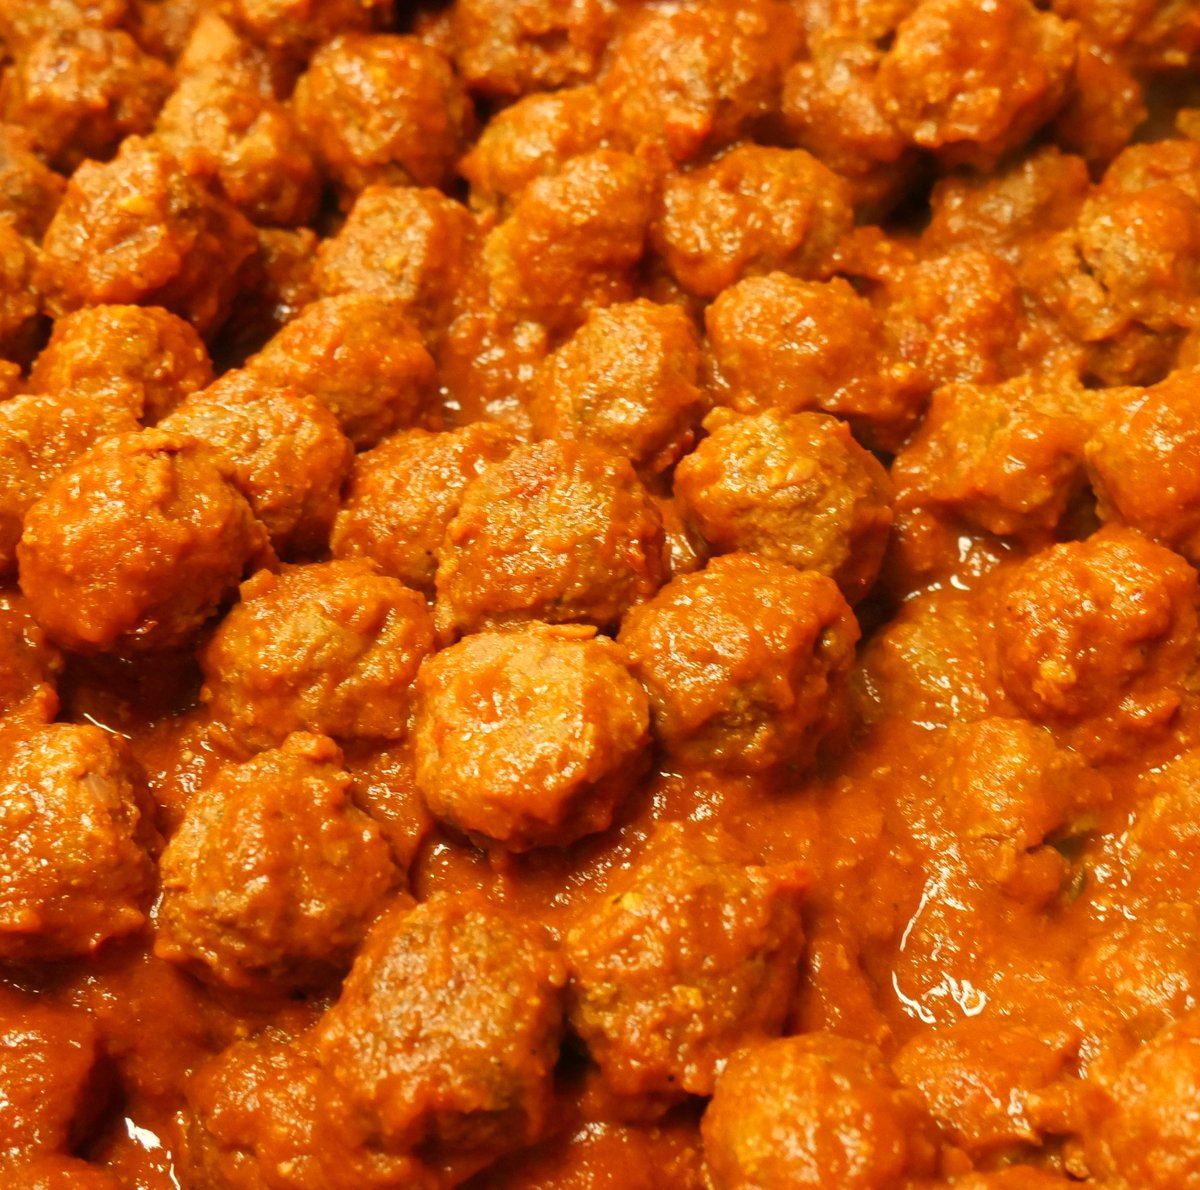 This is how we celebrate #NationalMeatballDay. What about you?